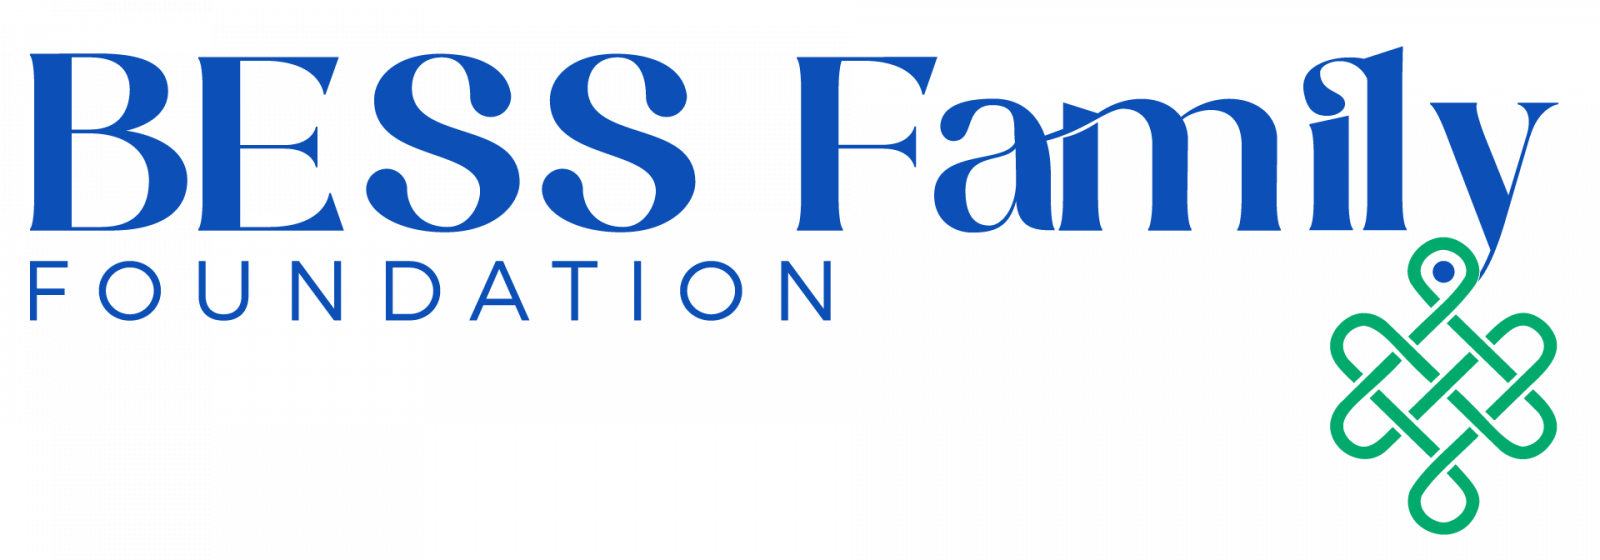 Bess Family Foundation